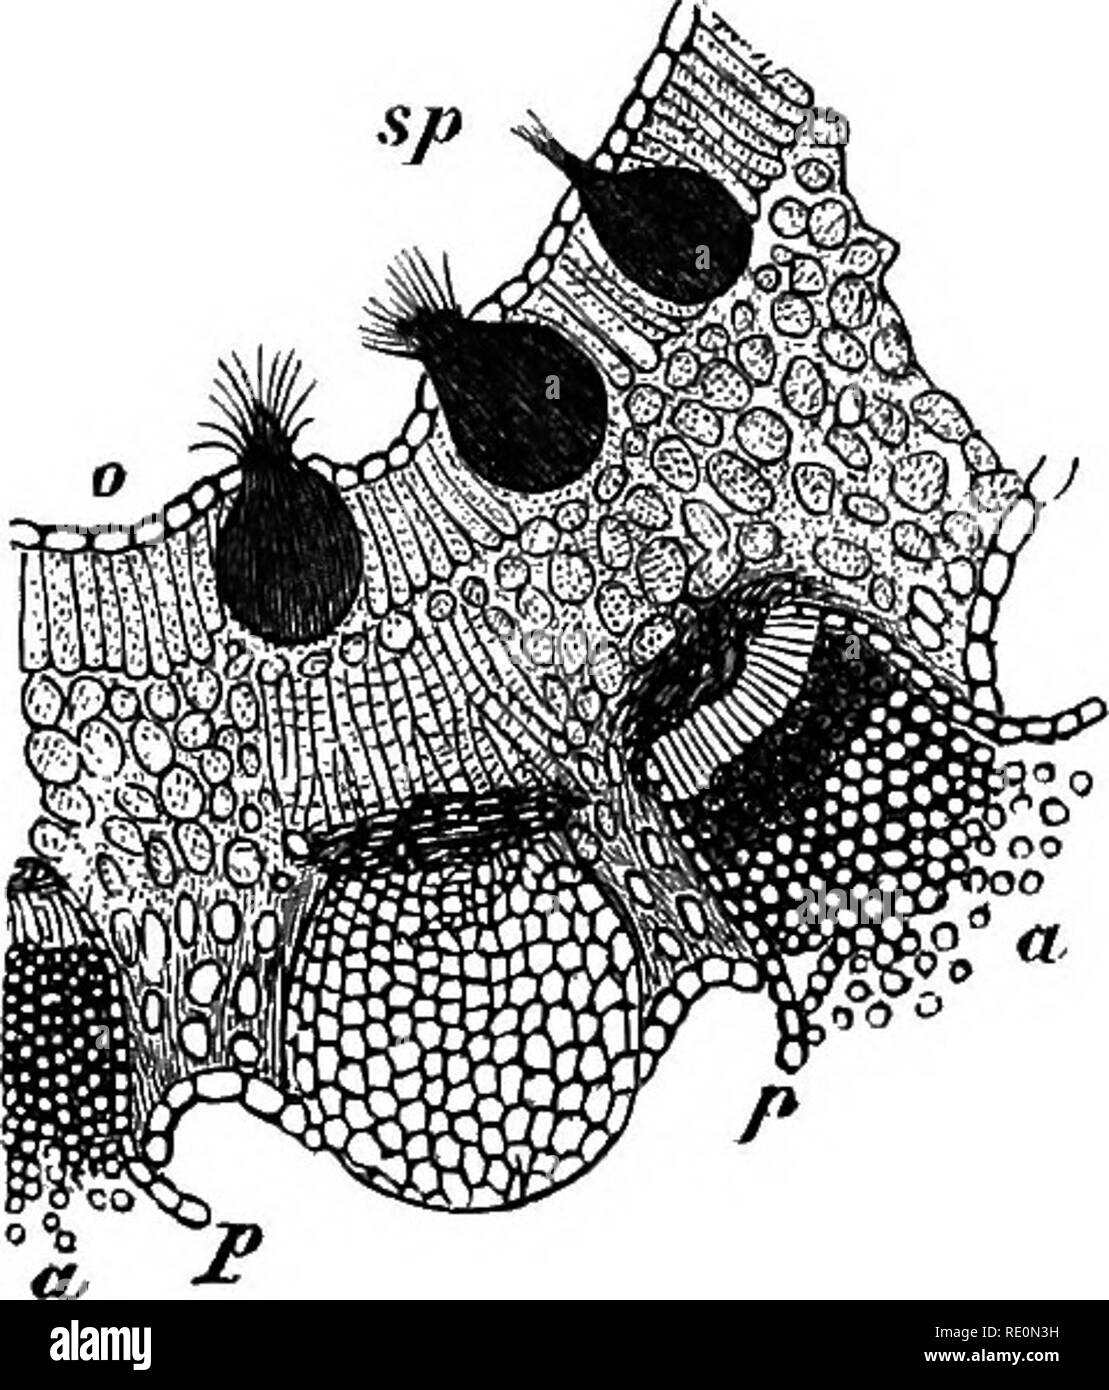 . A manual of botany. Botany. Fig. 851. Group of three uredospores, ui and one teleutospore, t, springing from mycelium &amp;h. Fig. 852. Section through leaf of the Barberry infested with Puccinia graminis. o. Epidermis of upper surface of leaf, sp. Spermogonia. p,p. Layers of cells (^ertrfmm), surrounding a, a, the fficidium fruits. After Sachs. same name. They produce spermatia in the same way as the latter. Upon the under surface large spherical bodies are formed (fig. 852), containing a hymenial layer of sterigmata which cut off from their apices a succession of spores known as CBcidiosp Stock Photo